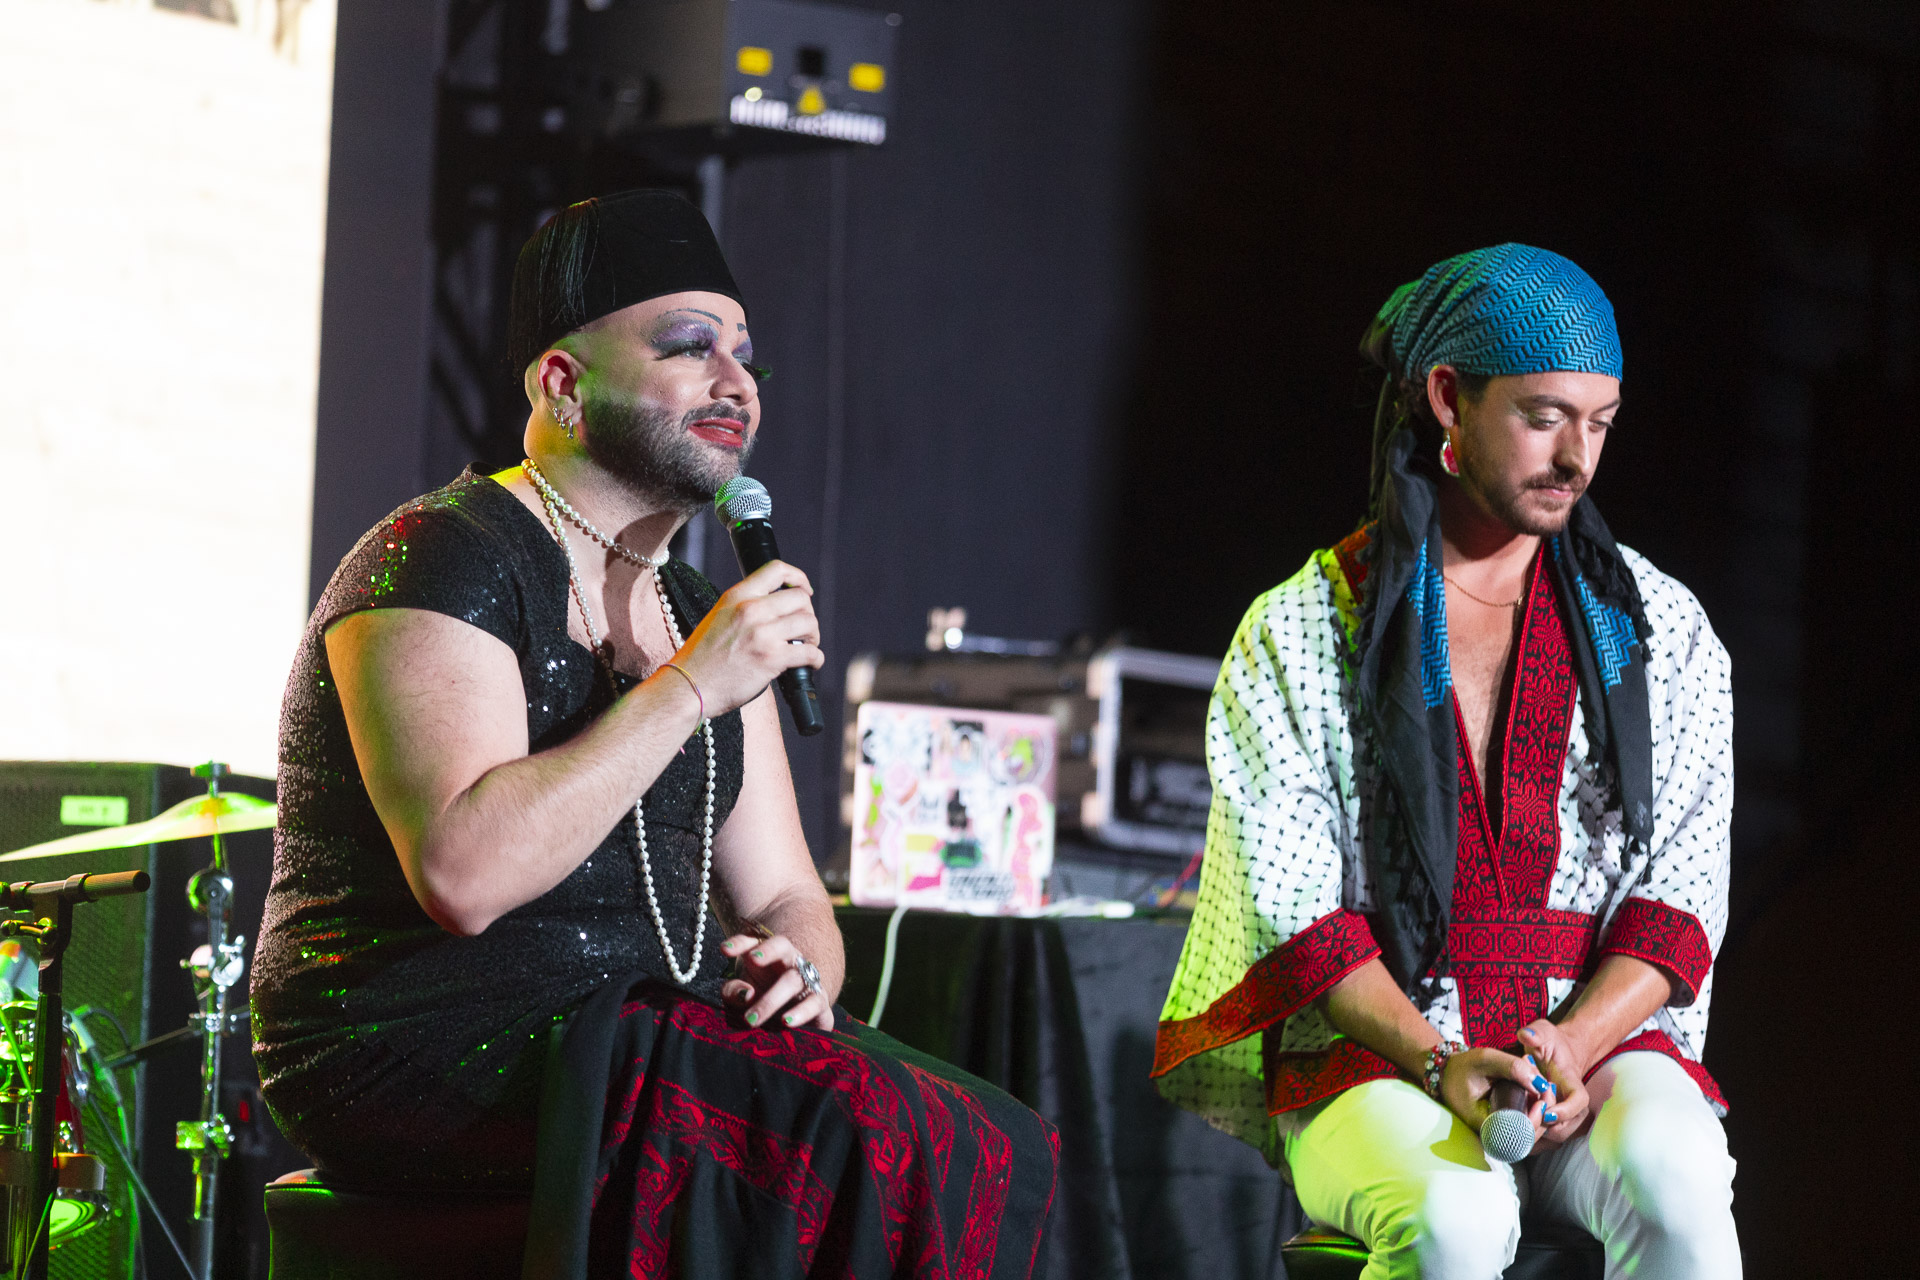 Two Palestinian drag performers wearing feminine clothing and makeup speak on stage.